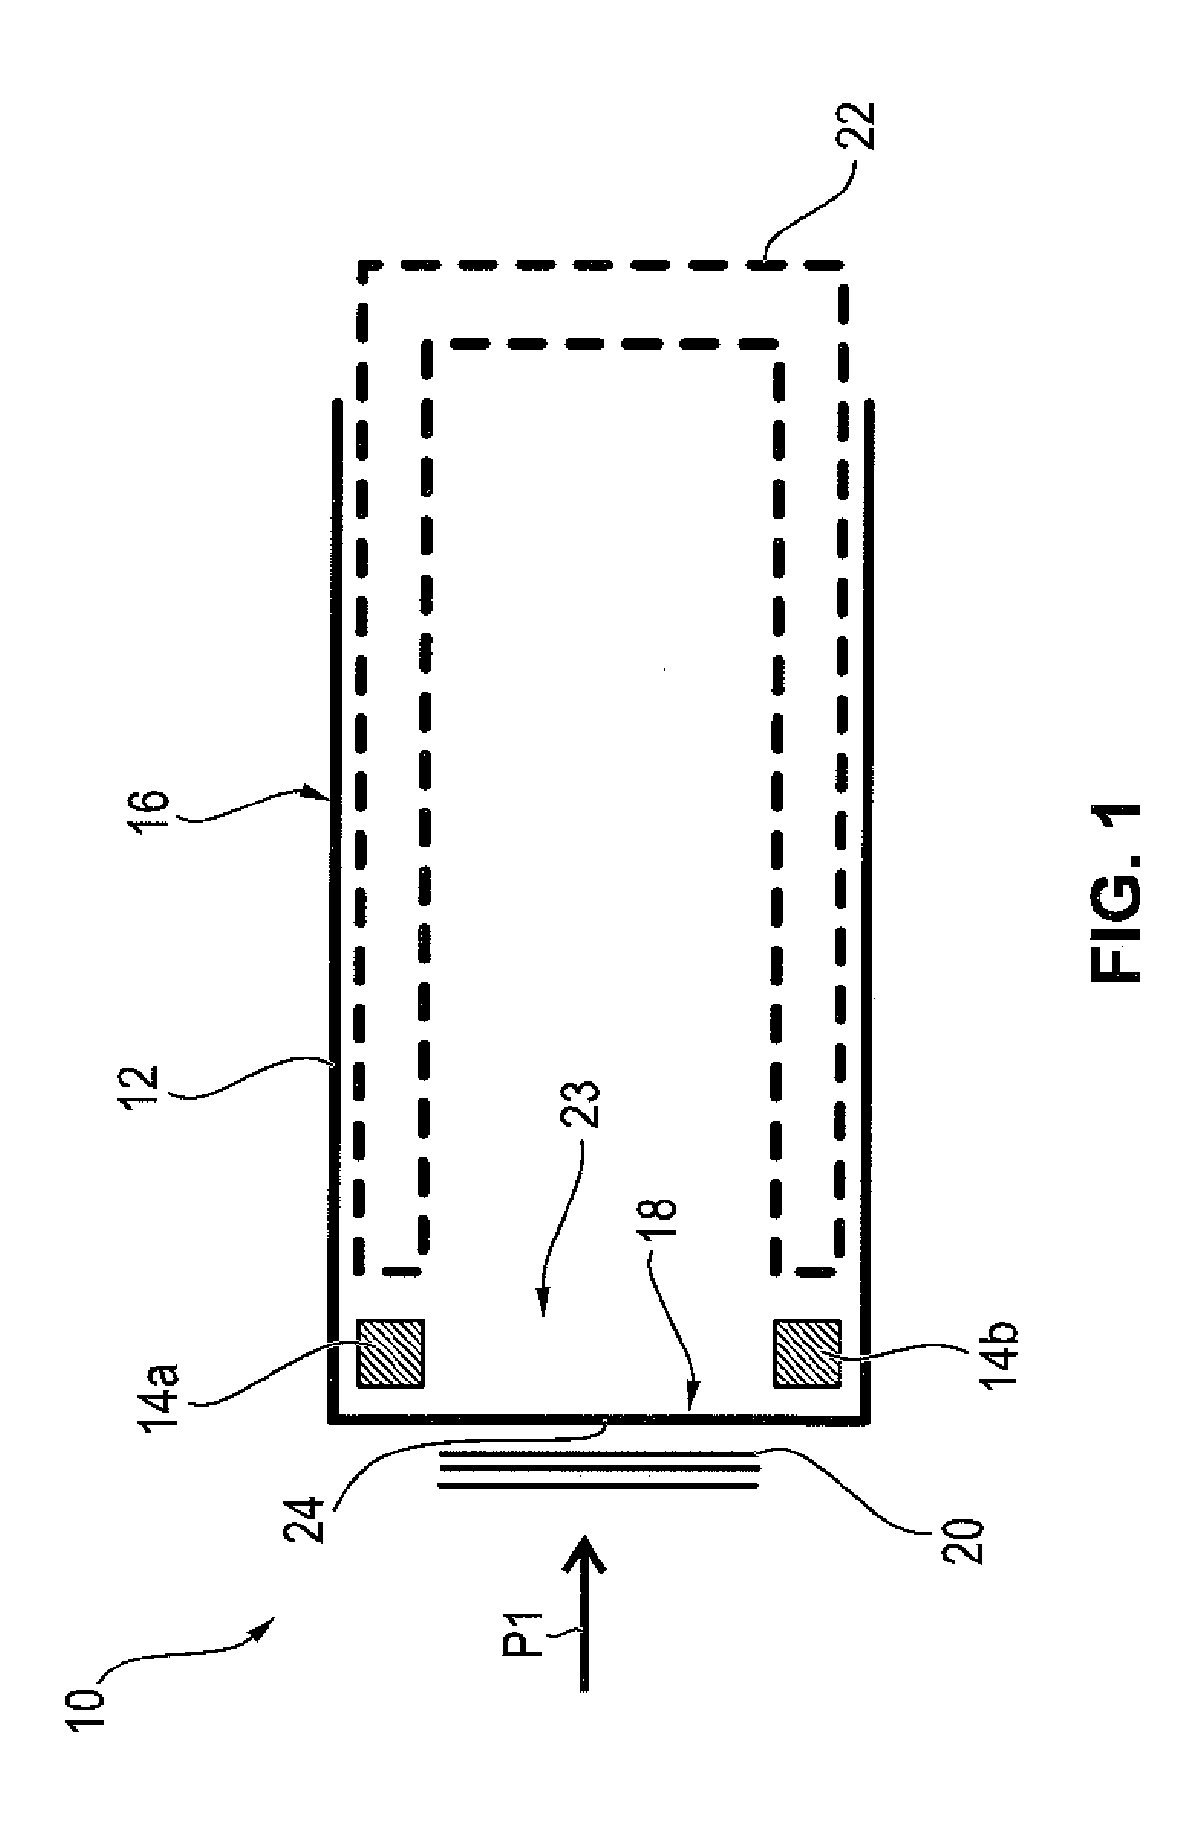 Method for filling at least one thin-walled transport container with at least one valuable object and device for safekeeping at least one valuable object